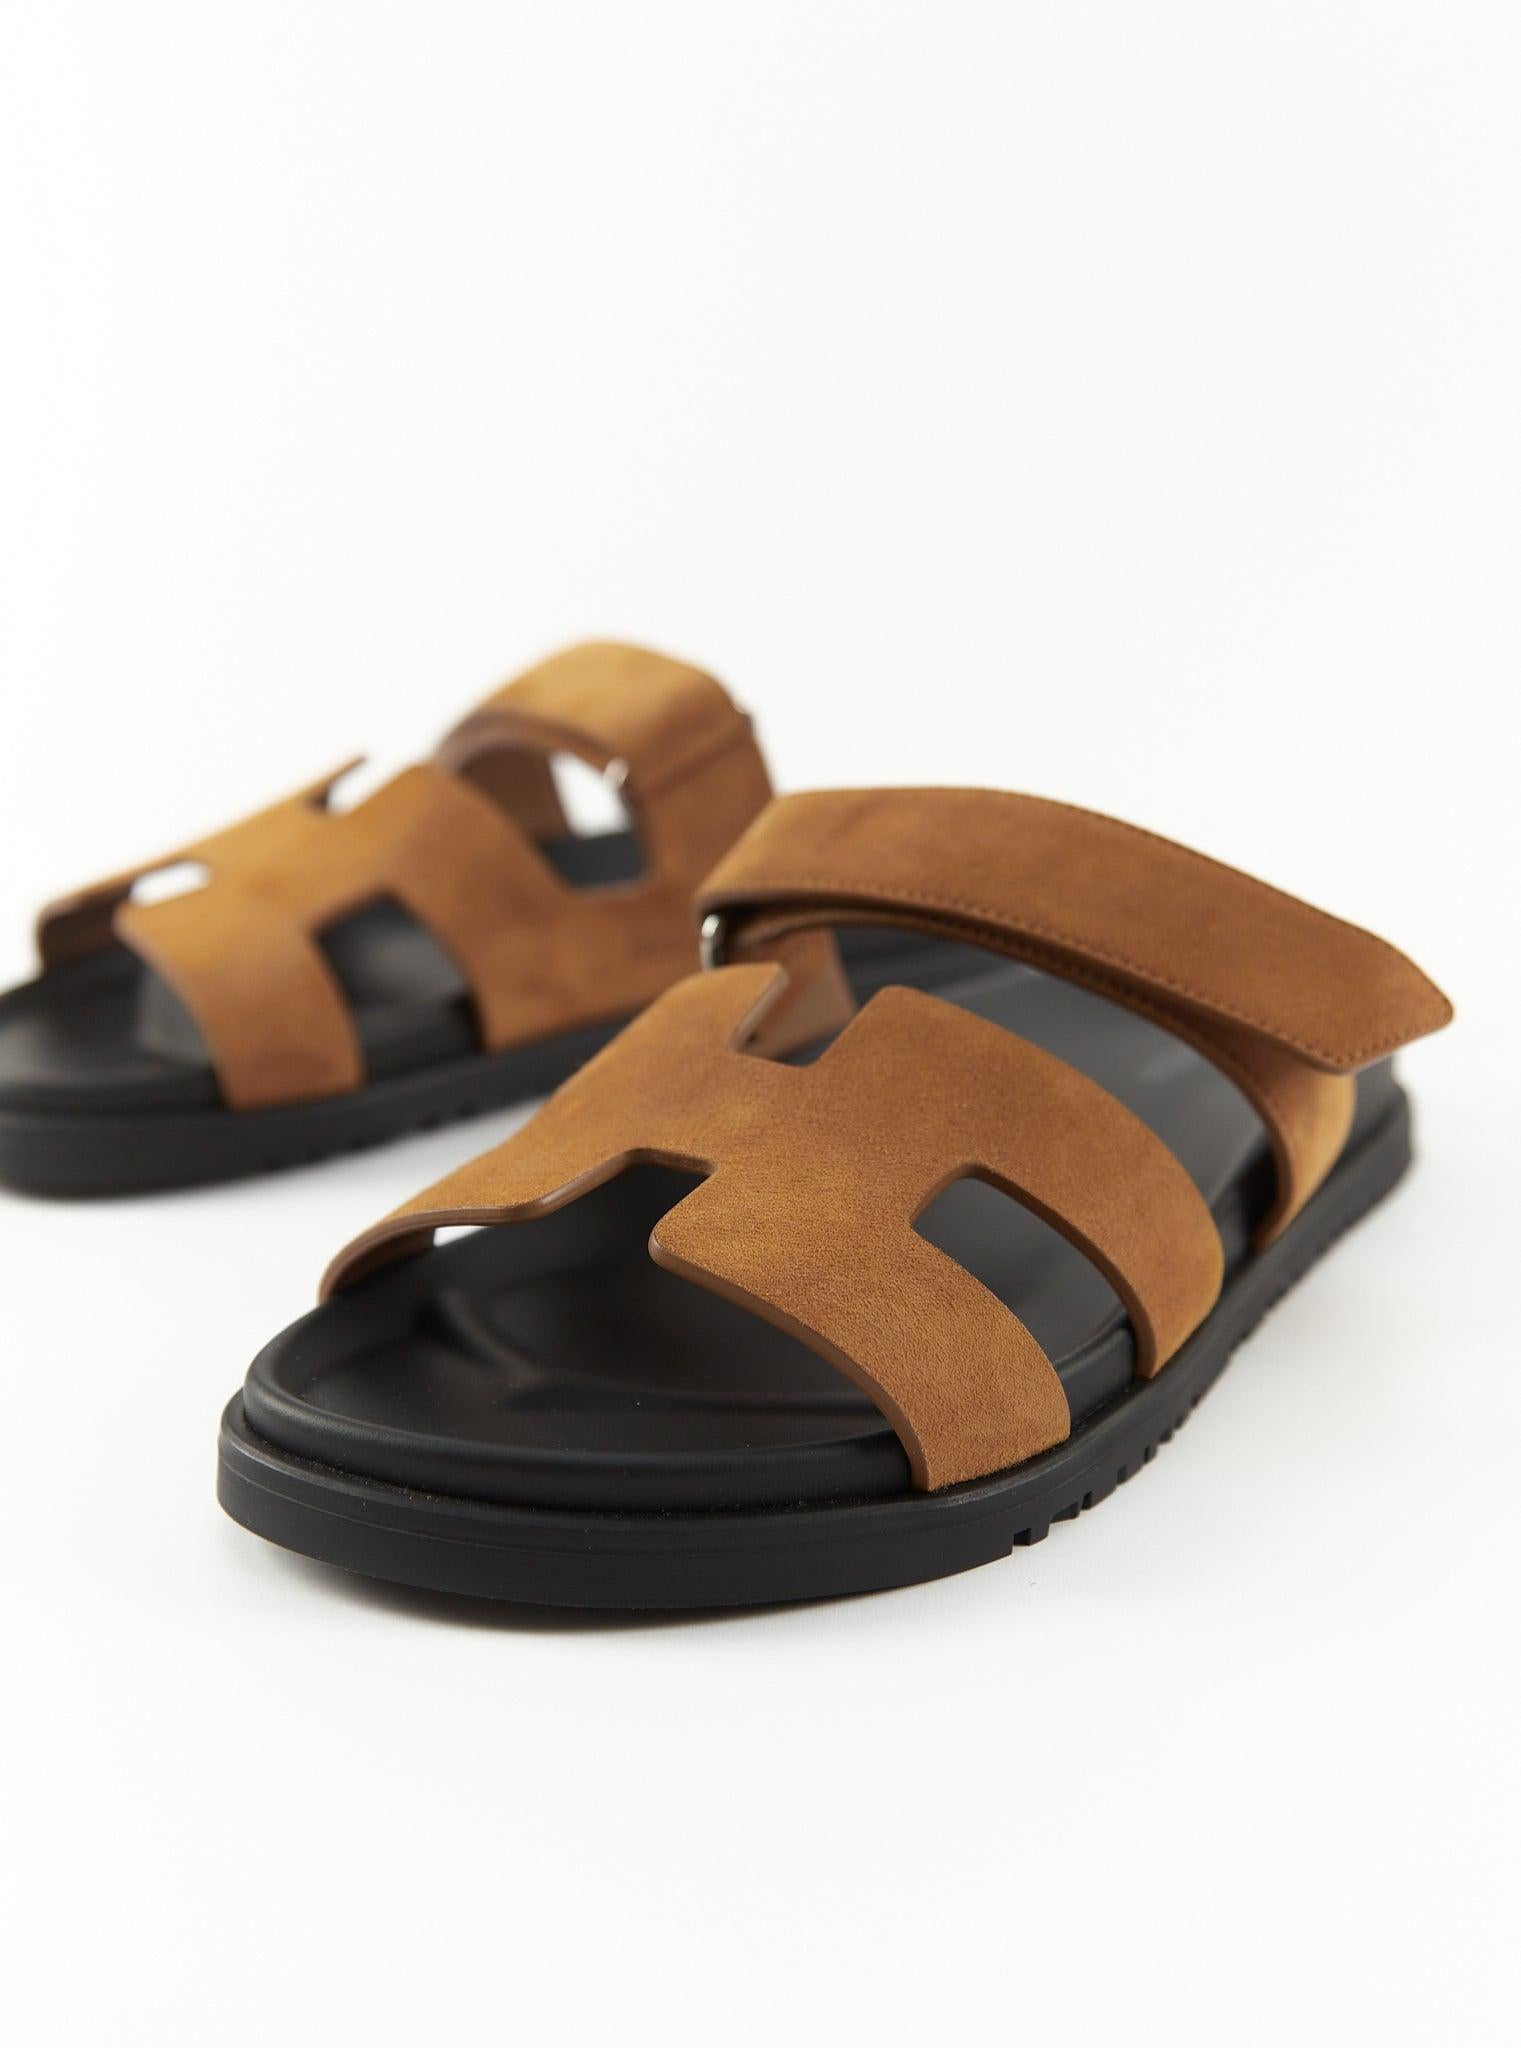 Hermès Techno-sandal in Natural

Suede goatskin with anatomical rubber sole and adjustable strap

Made in Italy

Accompanied by: Hermès box, dust bags and ribbon

Size 37.5